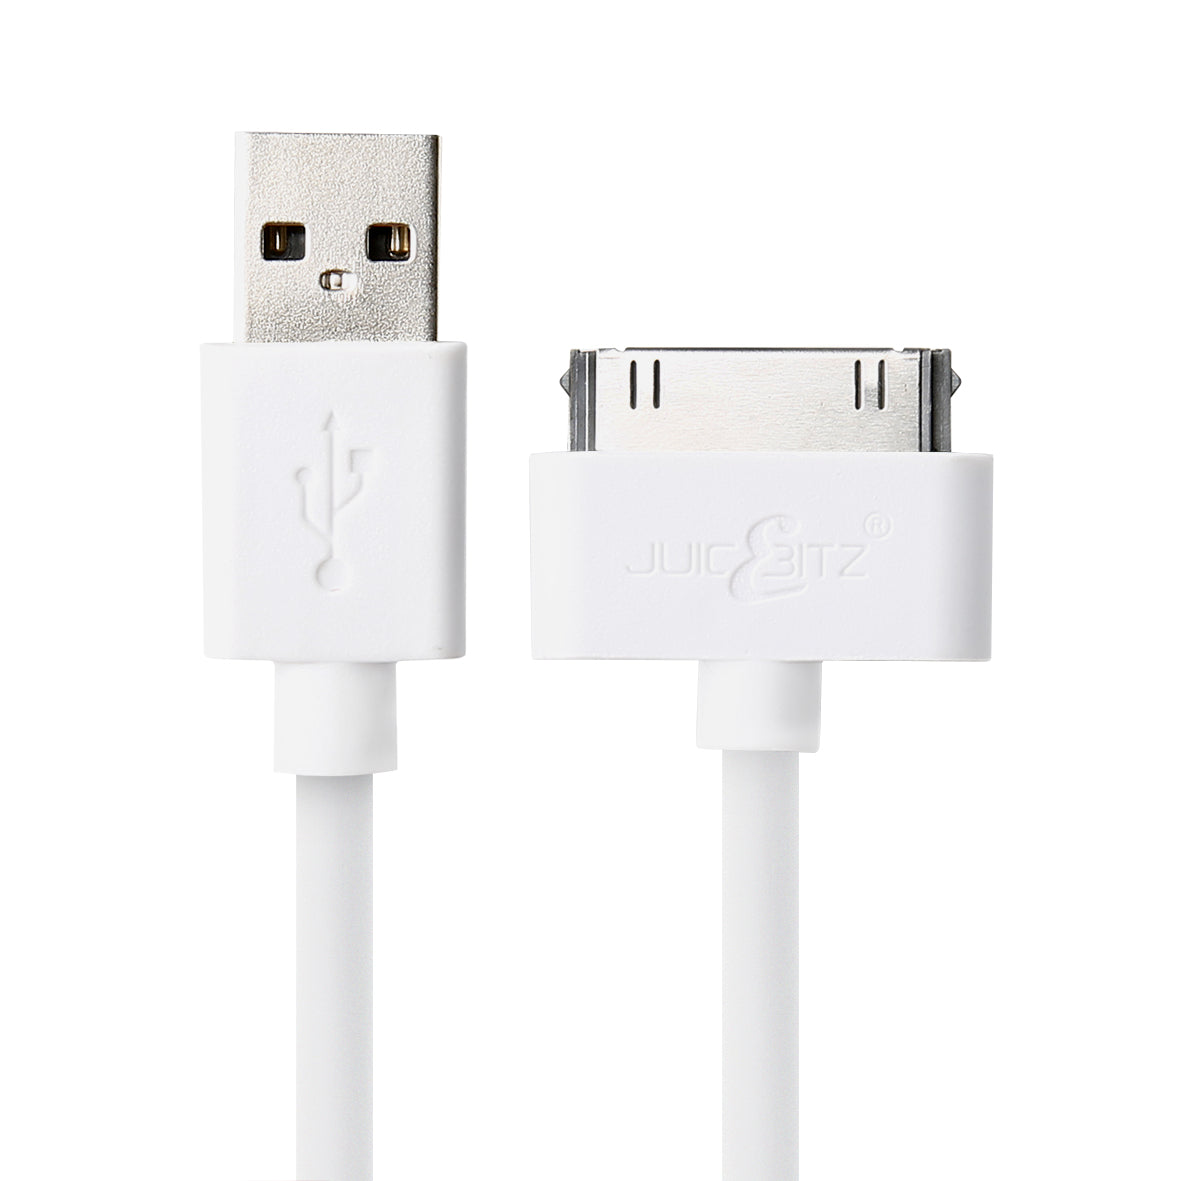 Apple 30 Pin USB Charger Cable Sync Lead for iPhone, iPad, iPod - White